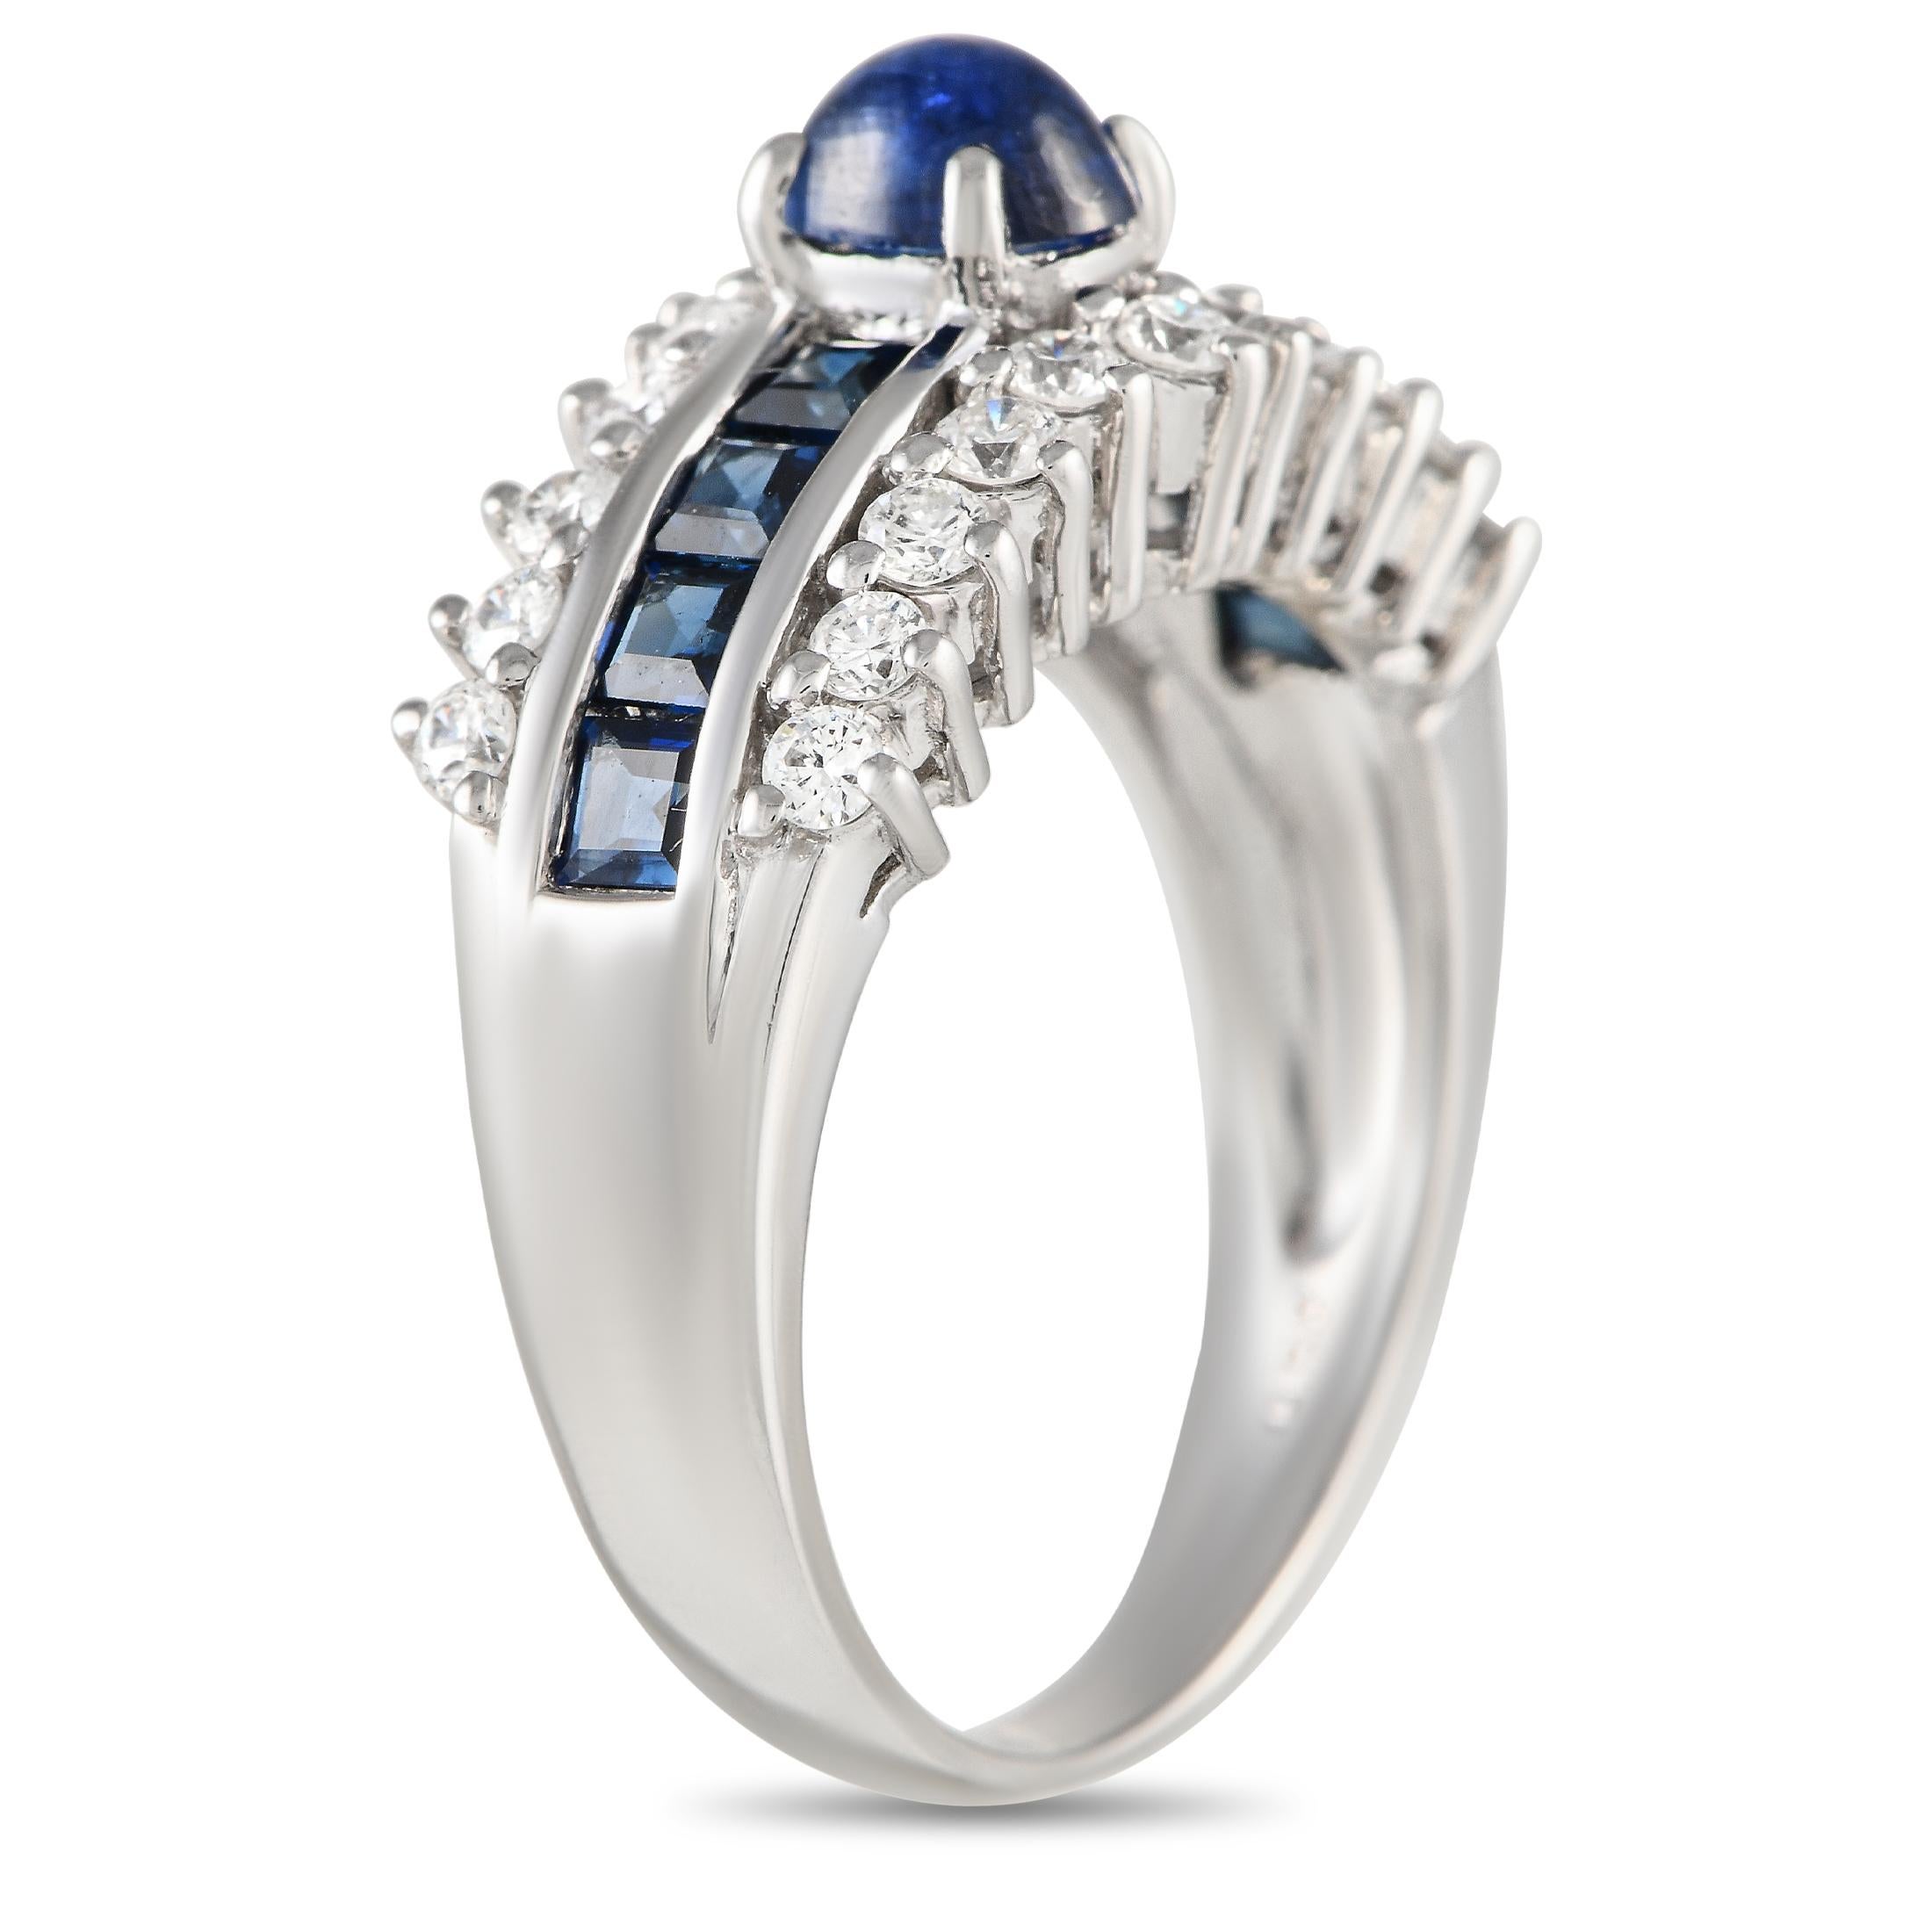 This dynamic luxury ring is impossible to ignore. Sapphire gemstones with a total weight of 1.55 carats make a statement at the center of the simple Platinum setting, which features a 3mm wide band a top height measuring 8mm. Sparkling diamonds with